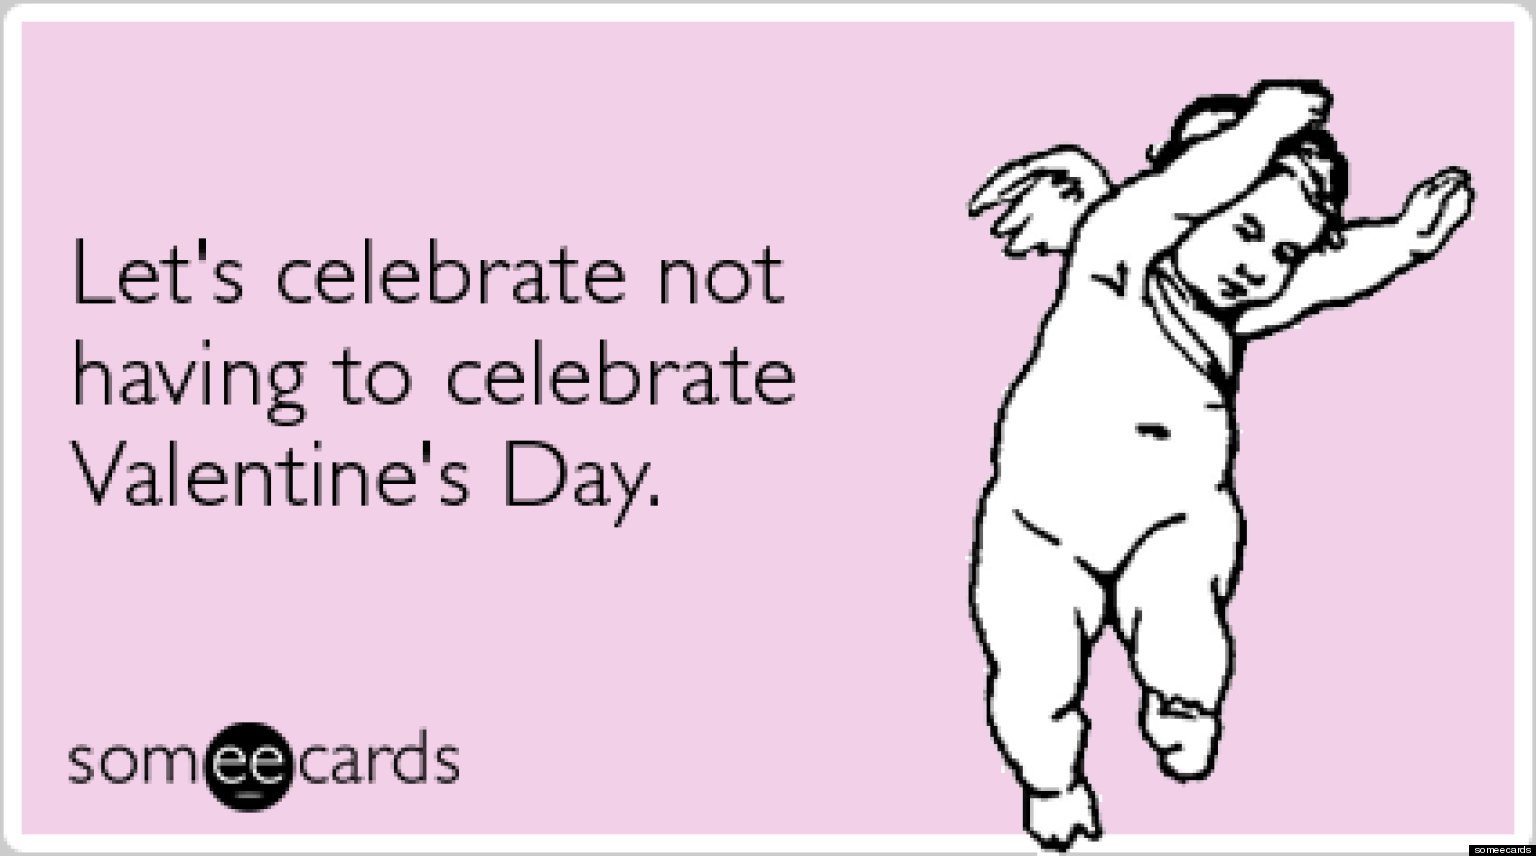 10 Ways Singles Can Have A Happy Valentine’s Day Too